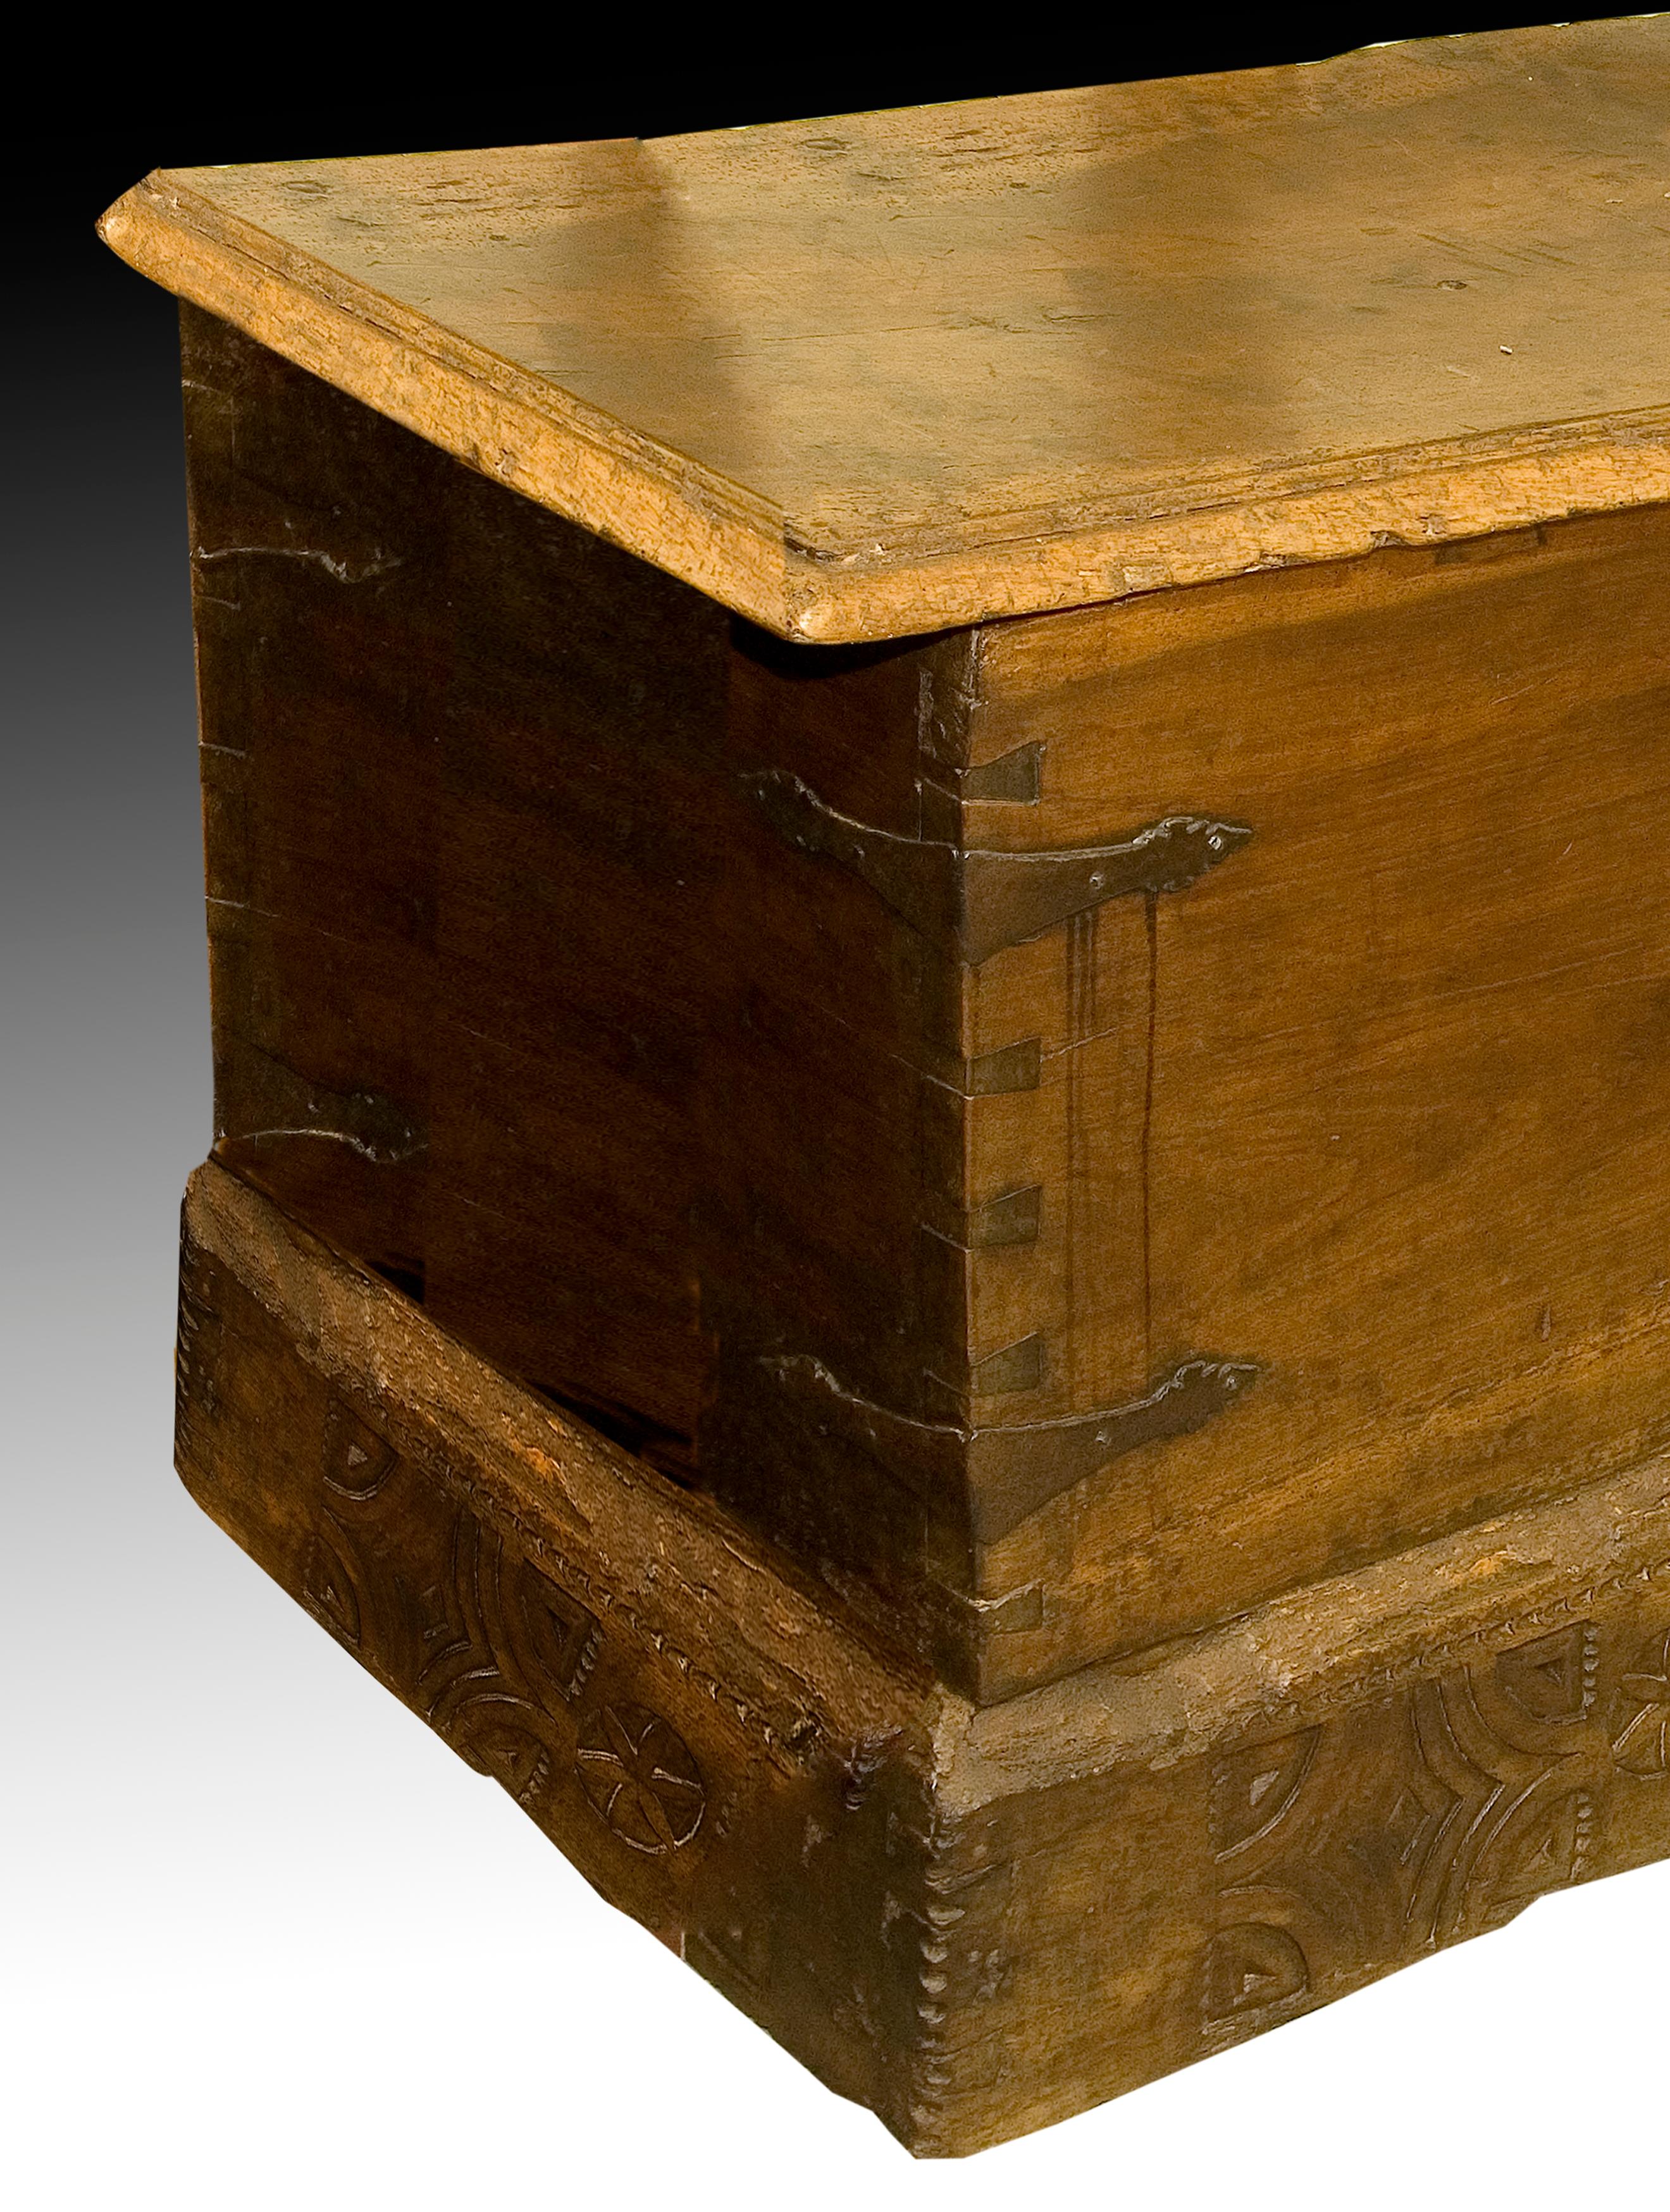 17th Century Baroque Burgalesan Walnut and Iron Rectangular Spanish Blanket Chest
Rectangular chest with a flat lid made of carved walnut wood, with corners and bolts in front to lock it with a key, and a carved decoration on the bottom with simple